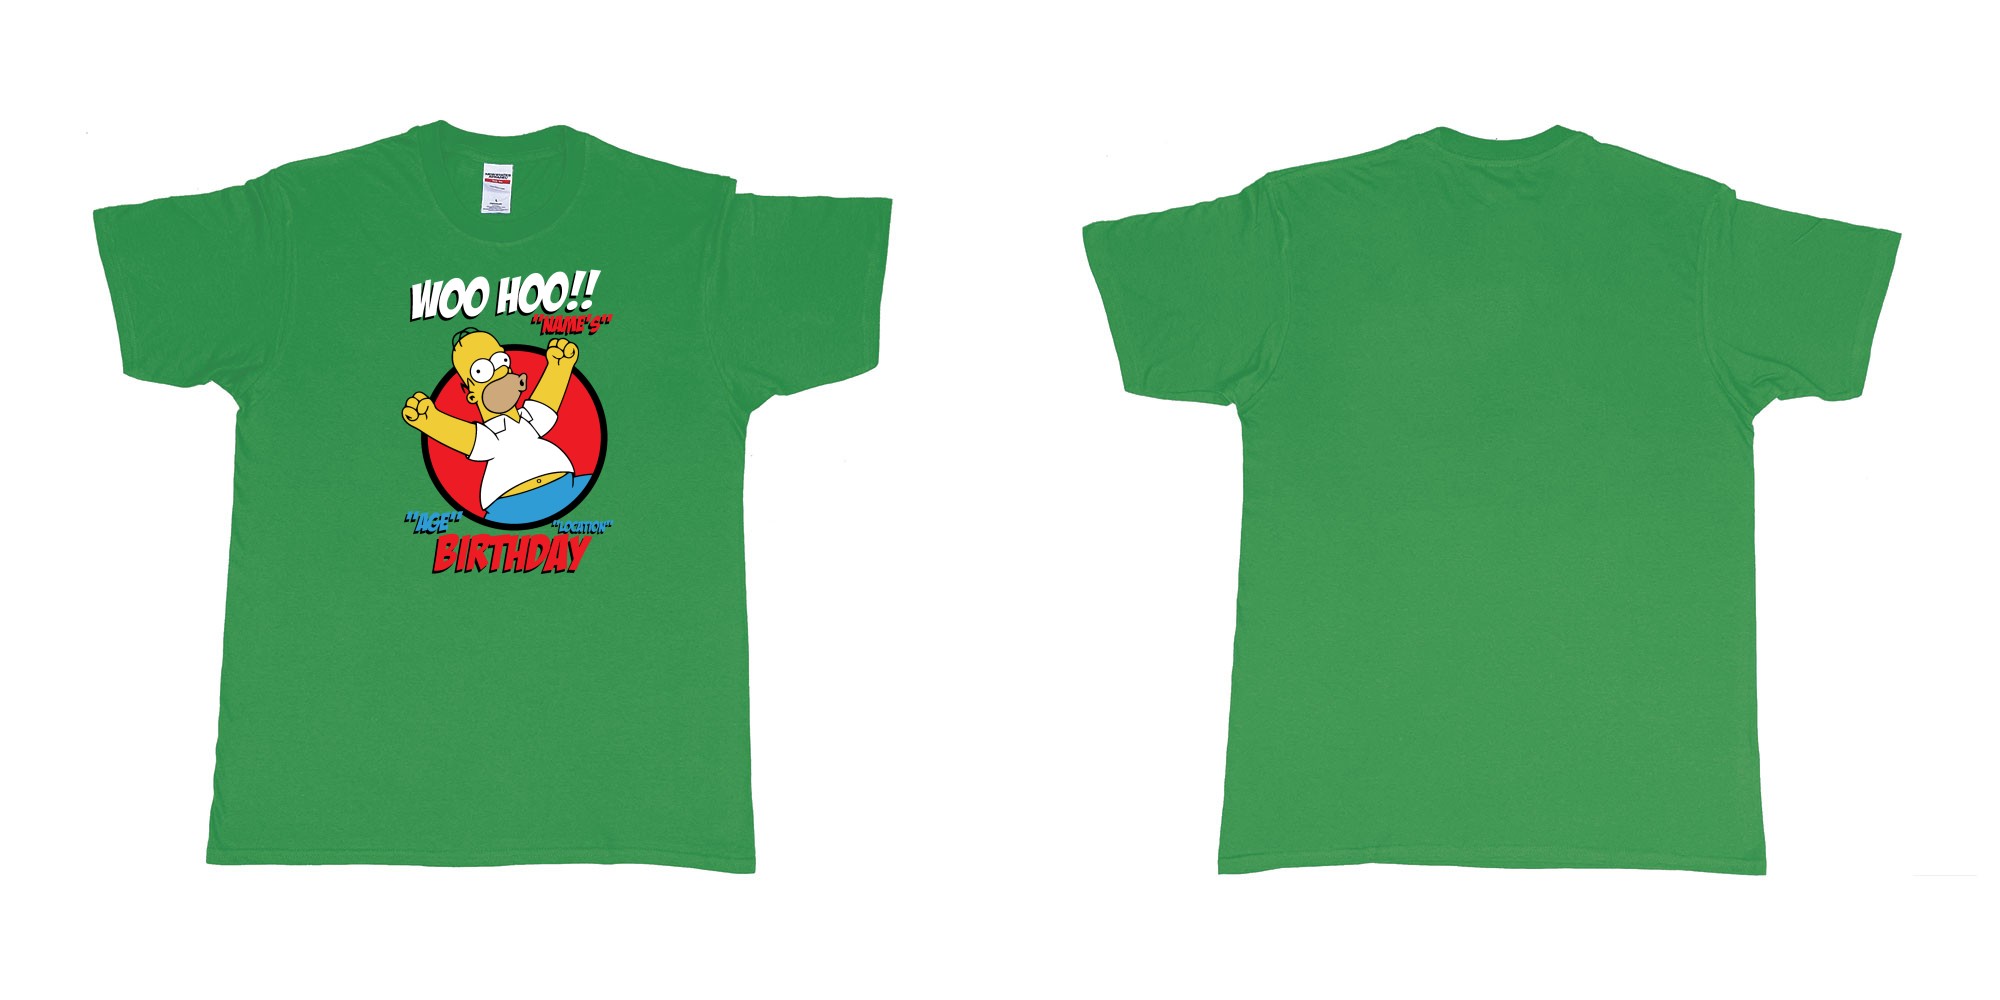 Custom tshirt design homer simpson woo hoo custom age name birthday in fabric color irish-green choice your own text made in Bali by The Pirate Way